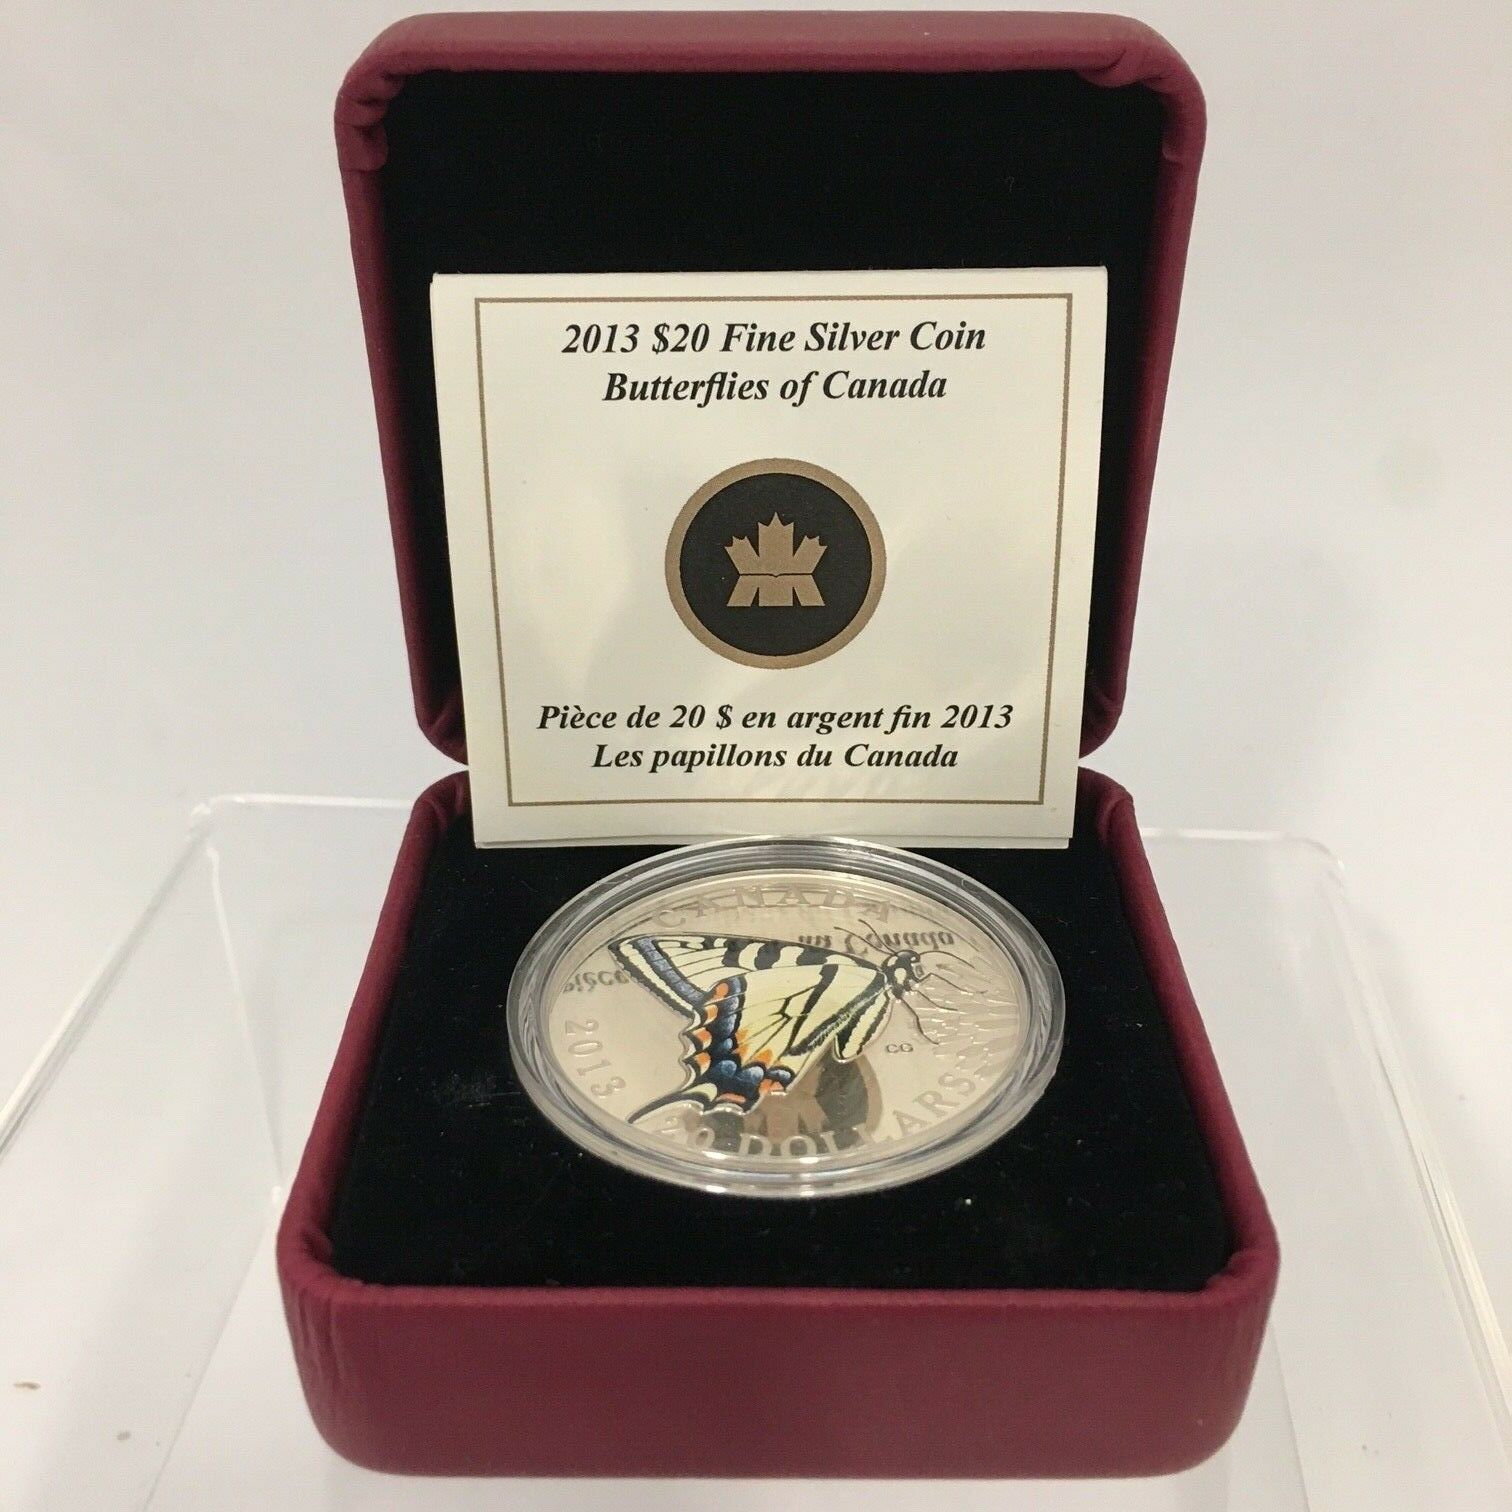 2013 $20 Fine Silver Coin Butterflies of Canada Canadian Tiger Swallowtail